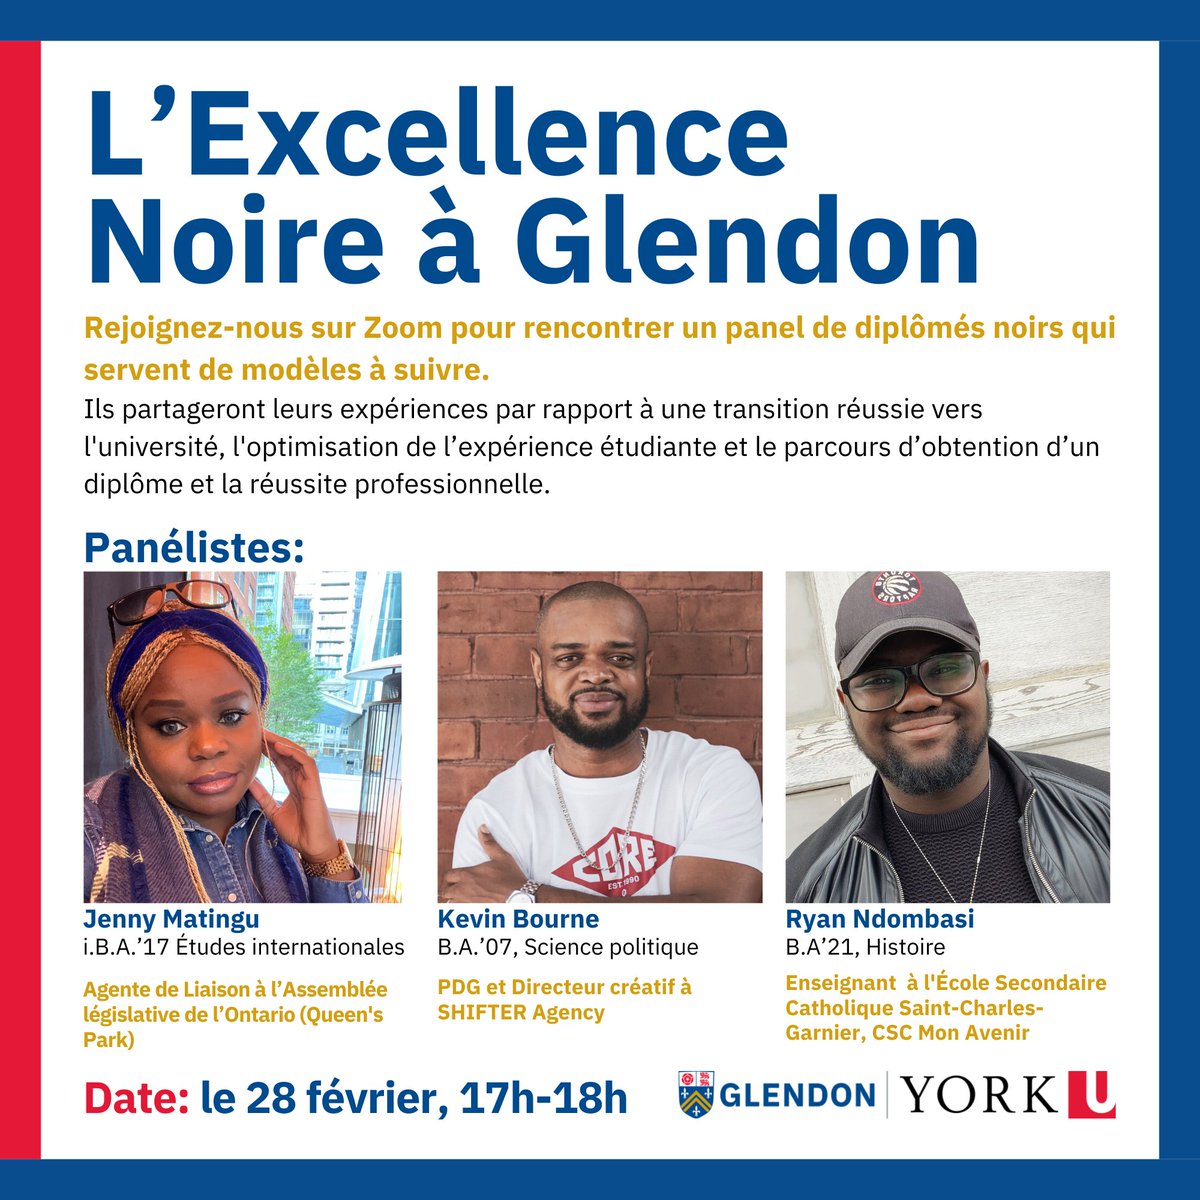 Meet Alumni: Jenny Matingu, Kevin Bourne and Ryan Ndombasi in this panel on Monday, Feb 28. Hear about their journey to, during and beyond Glendon as well their advice for  future Glendon students.
Inscrivez-vous: https://t.co/aNauLbbudb  #BHMatYU https://t.co/Jd0kQ3CqZN